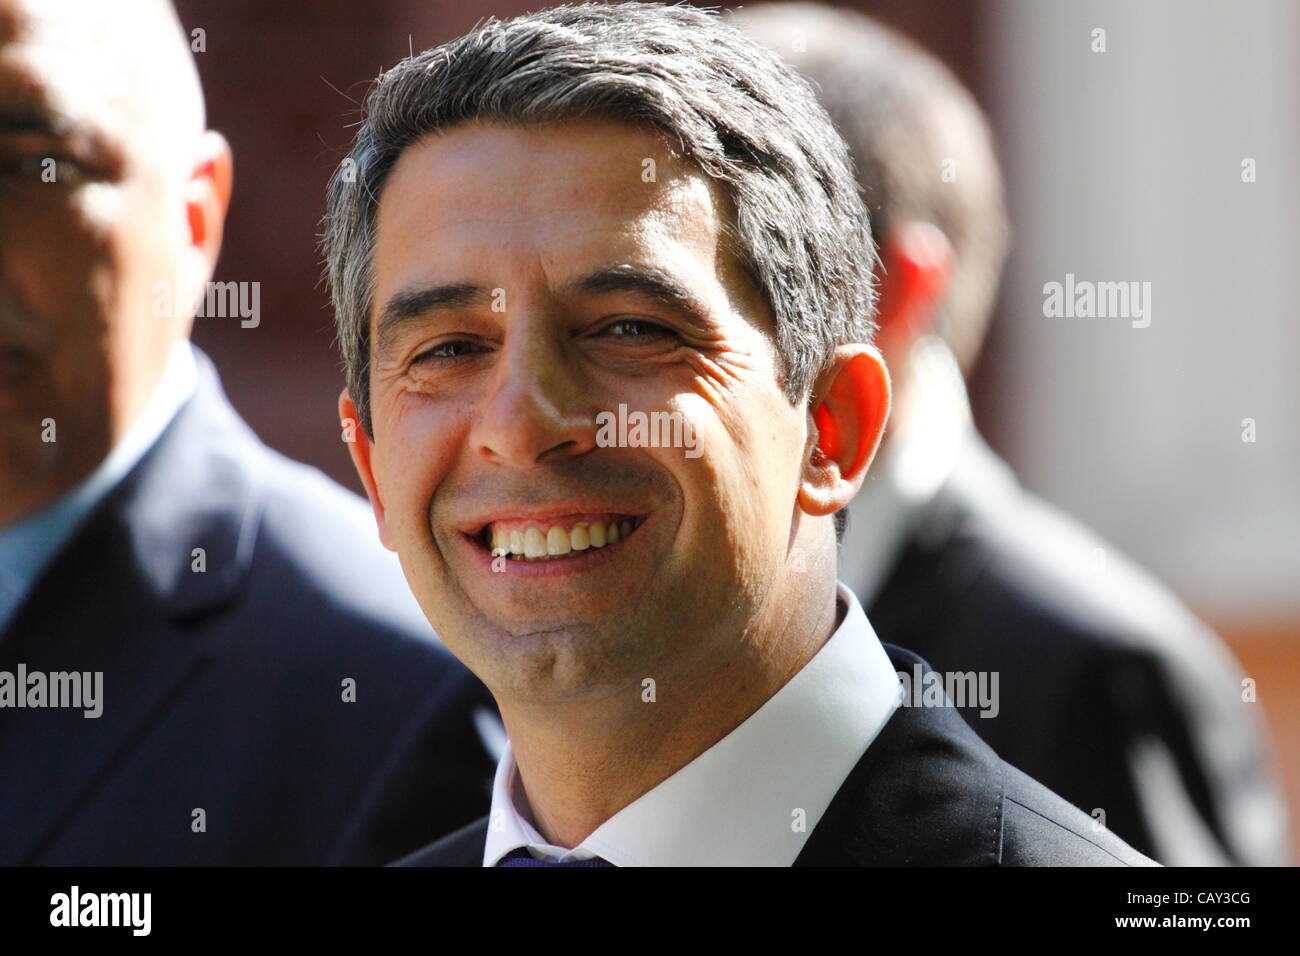 The President of Bulgaria Rosen Plevneliev smiling into the camera shortly before the beginning of the traditional Bulgarian Army Day parade in central Sofia, Bulgaria, 6 May 2012 Stock Photo